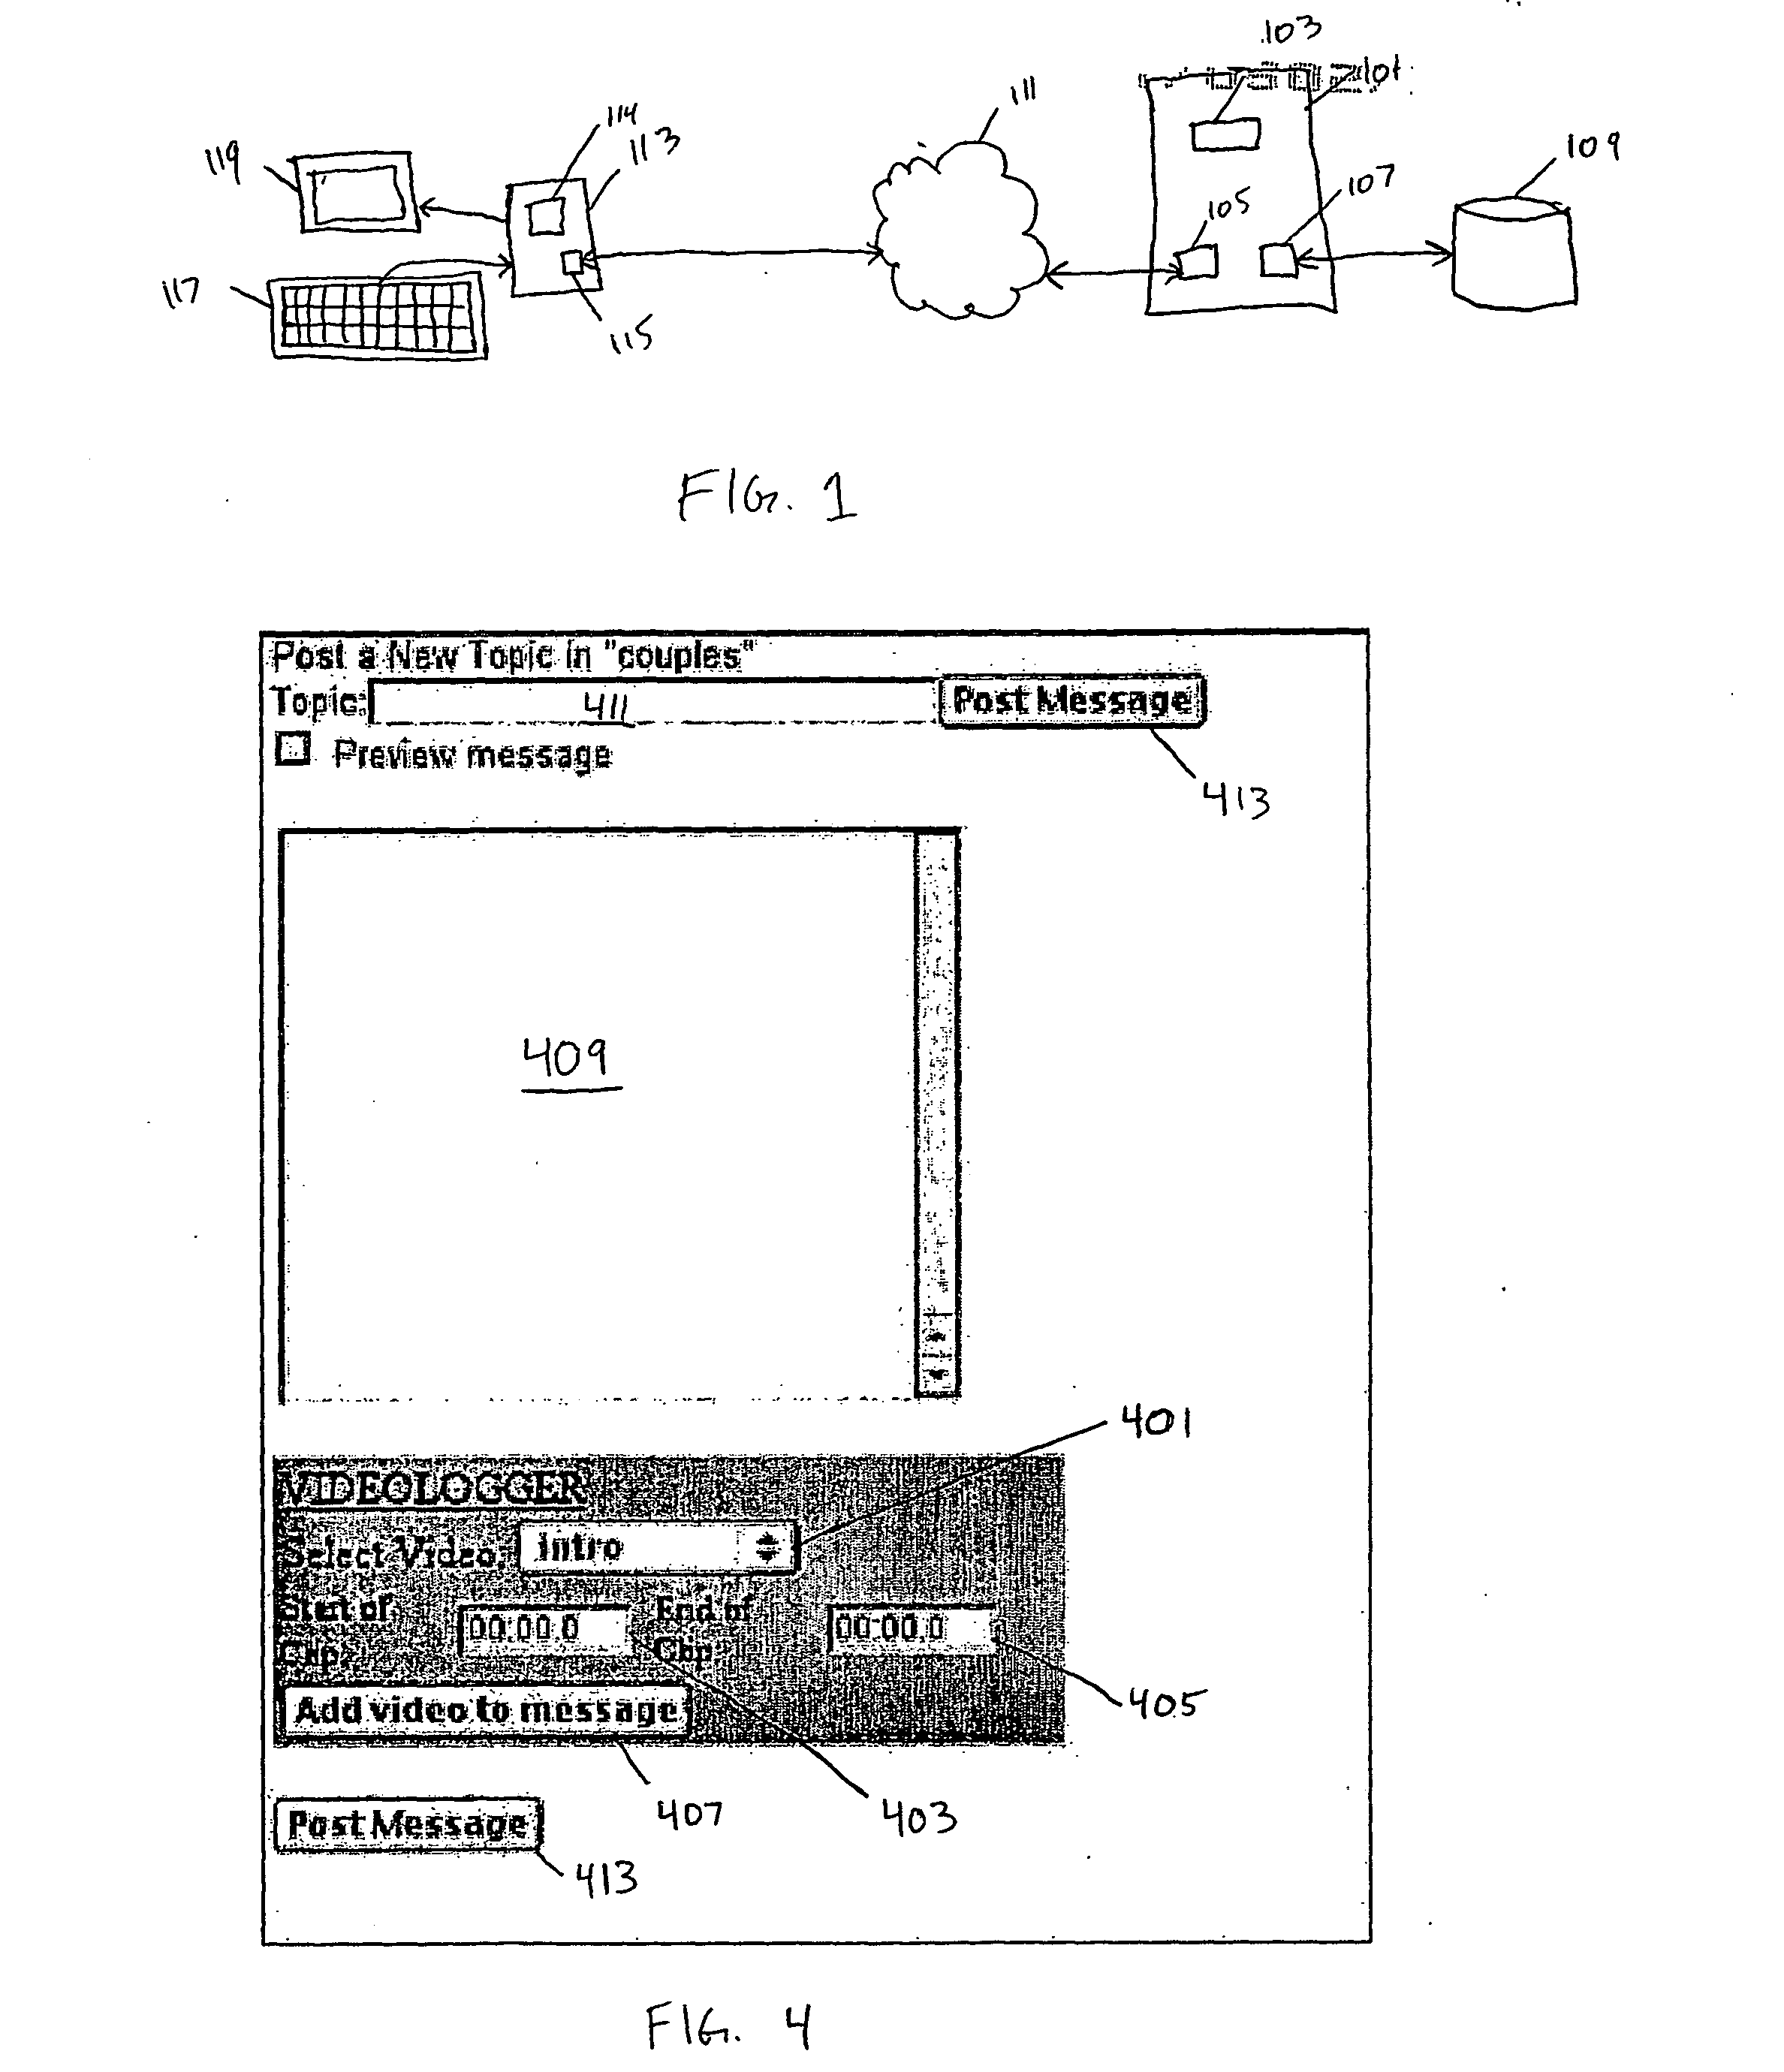 Method and system for annotating audio/video data files